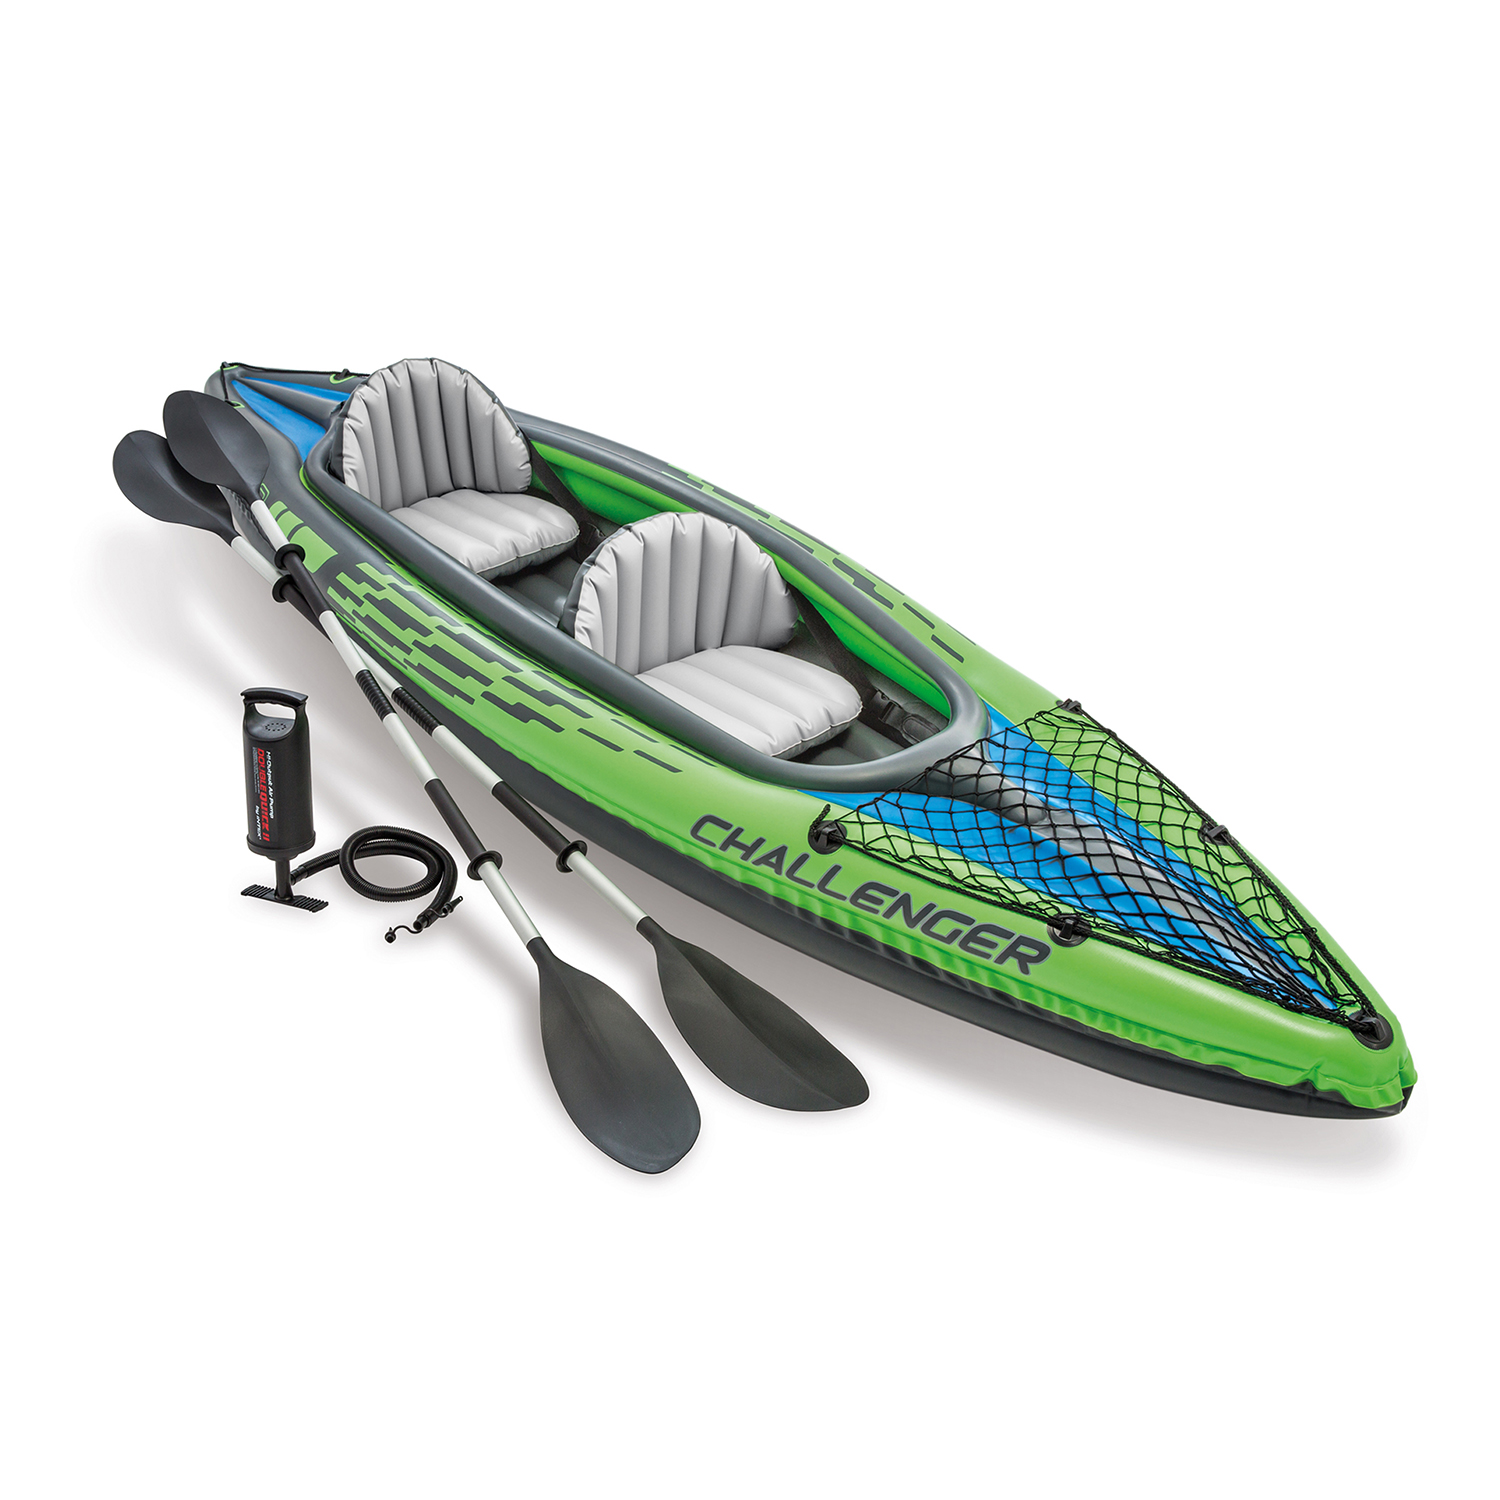 Intex Challenger K2 Inflatable Kayak with Oars and Hand Pump - image 1 of 8